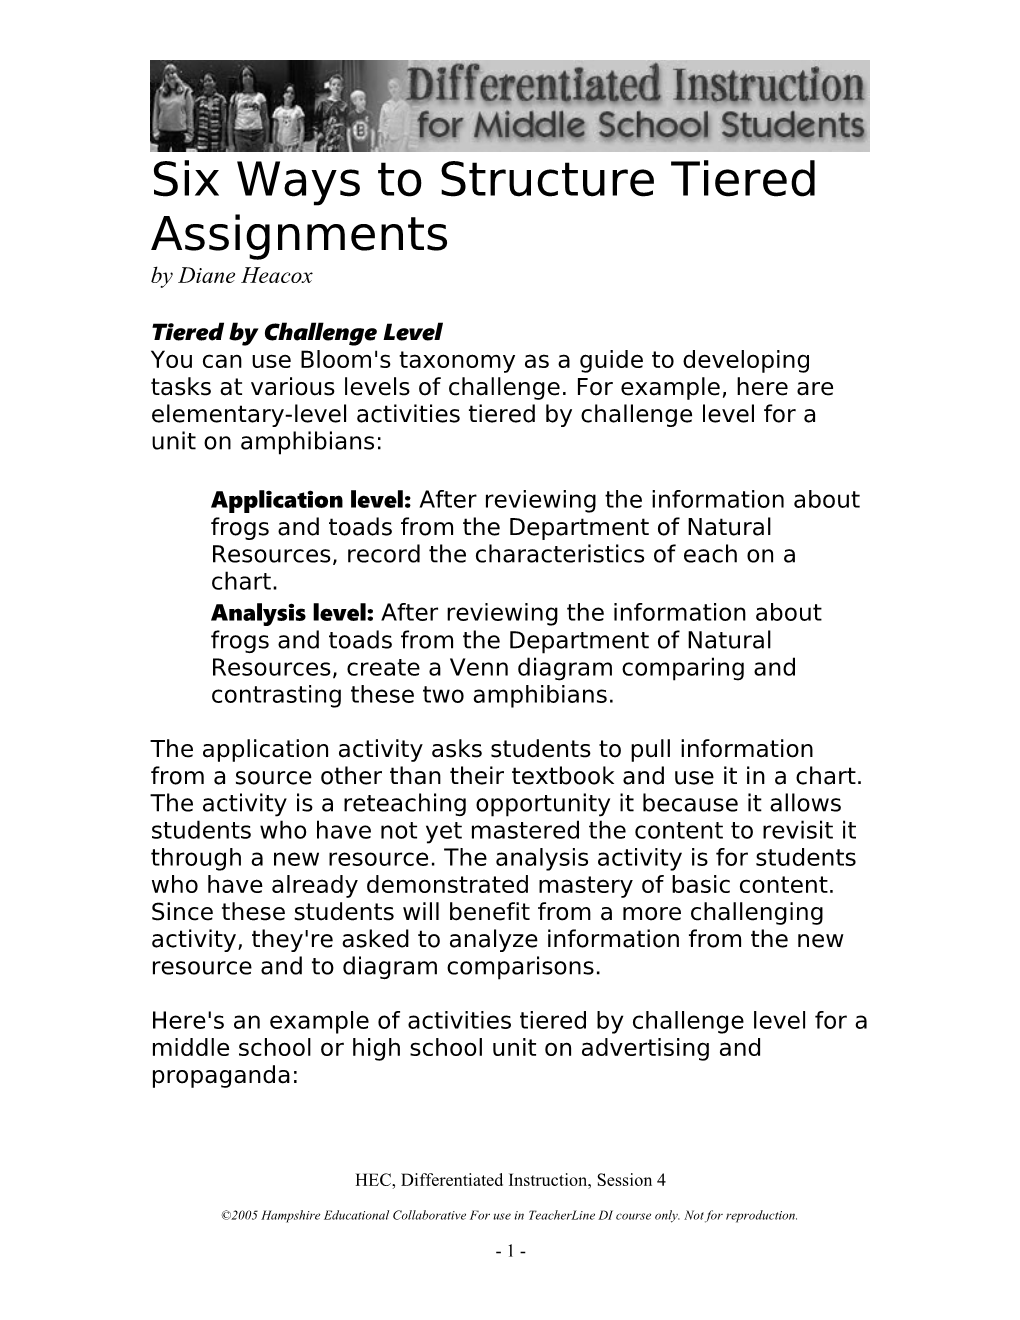 Six Ways to Structure Tiered Assignments by Diane Heacox